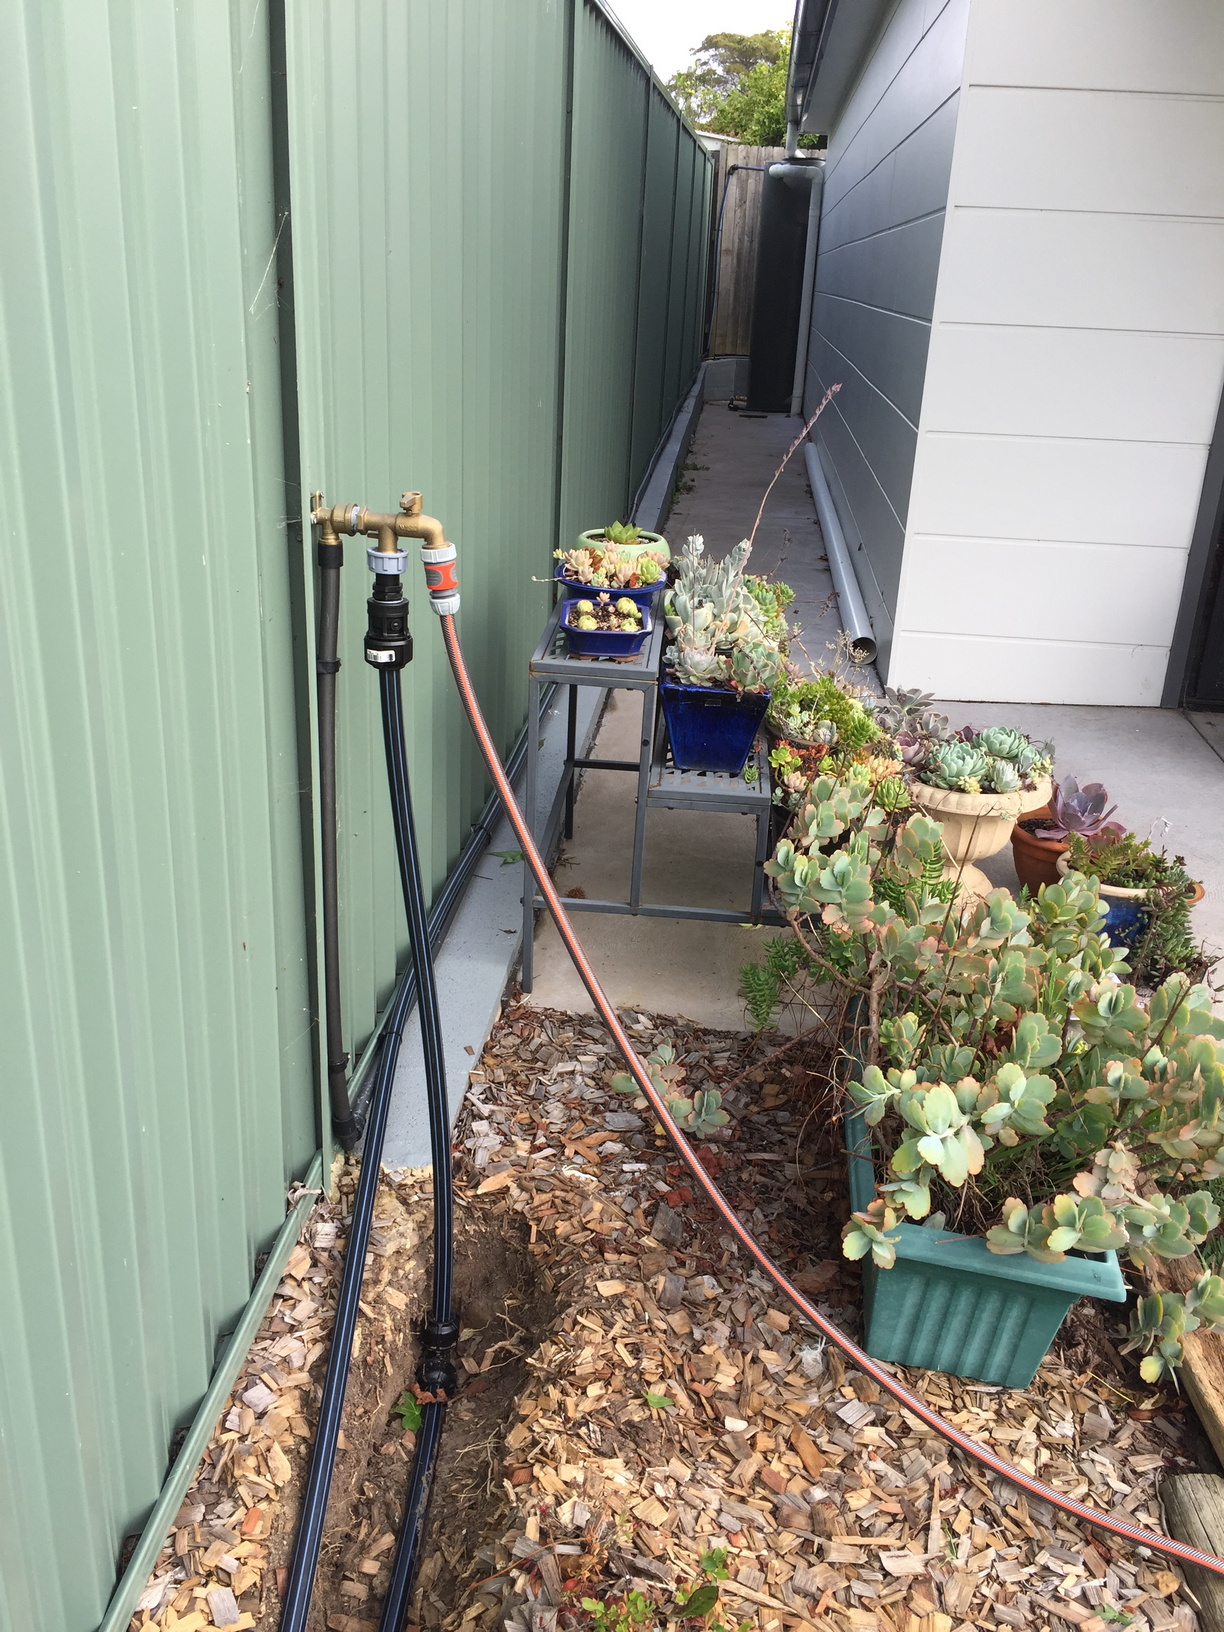 Double outlet tap from rainwater tanks, one outlet connected to normal garden hose, one outlet going to irrigation system. 25mm blue-line poly-pipe (running along retaining wall above the 20mm pipe), carrying mains water to float valve installed in rainwater tank.